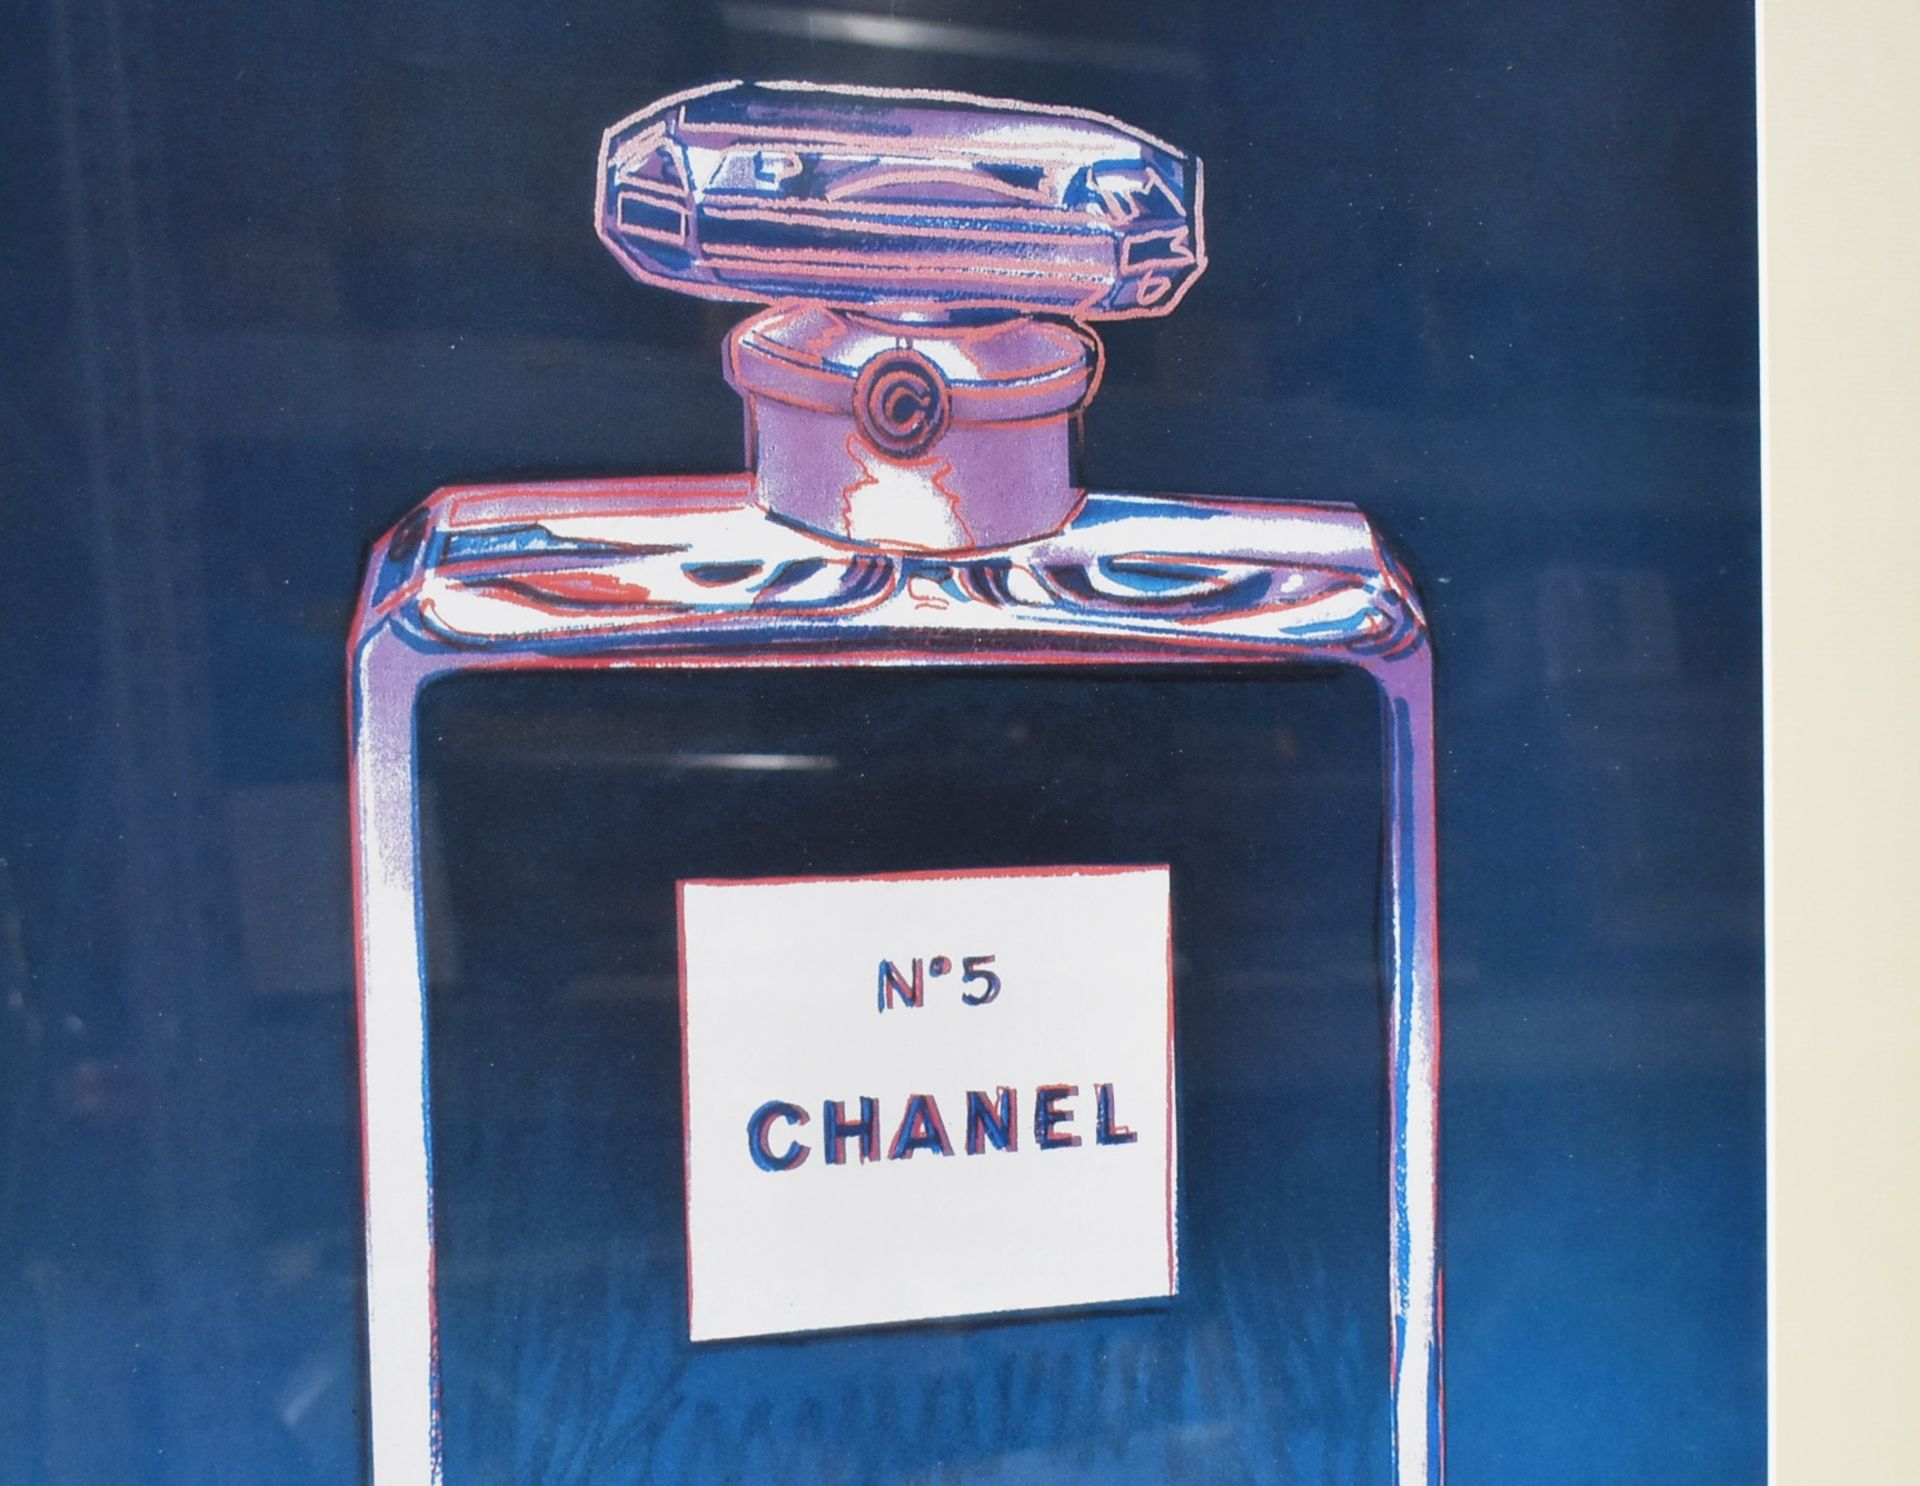 1 x 'Chanel No .5' The Iconic Coco Chanel Bottle Dark Blue & Violet Captured By Andy Warhol Print - Image 2 of 2